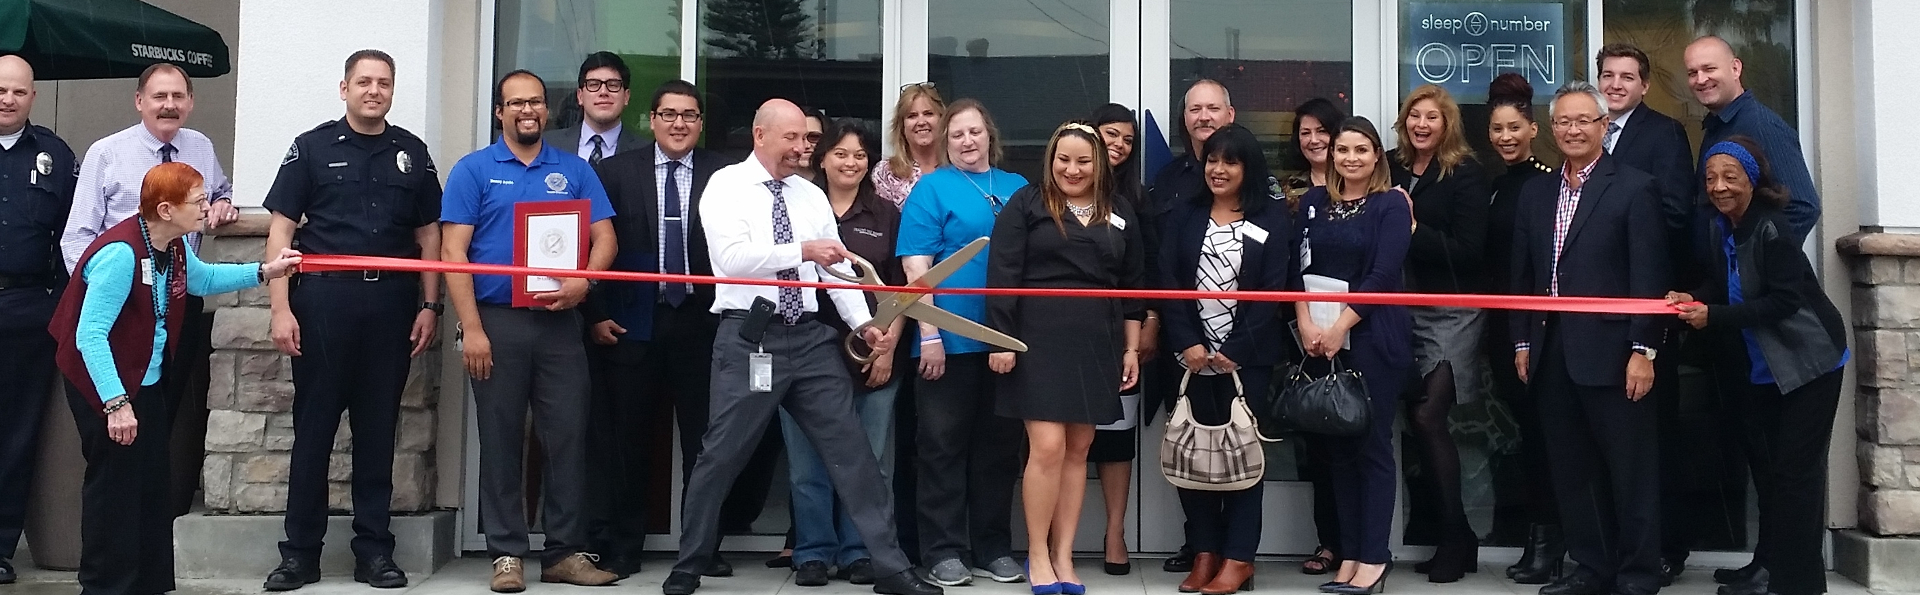 Ribbon cuttings like this one at Sleep Number are a great member benefit